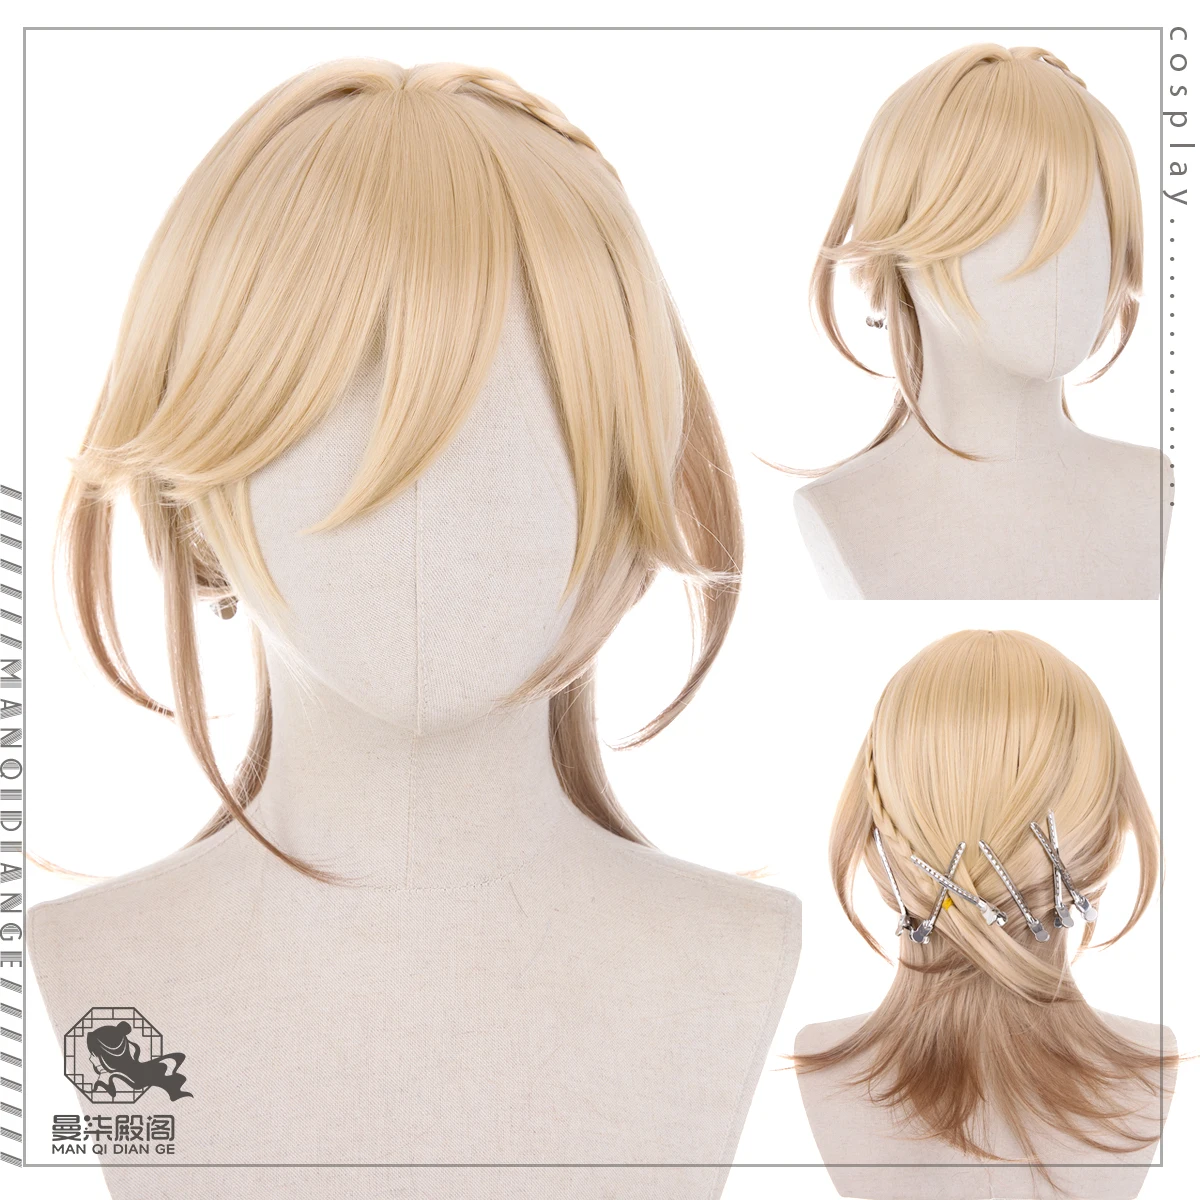 

Kaveh Cosplay Wig Genshin Impact Blonde Gradient Heat Resistant Synthetic Hair Role Play Halloween Carnival Party + Free Wig Cap